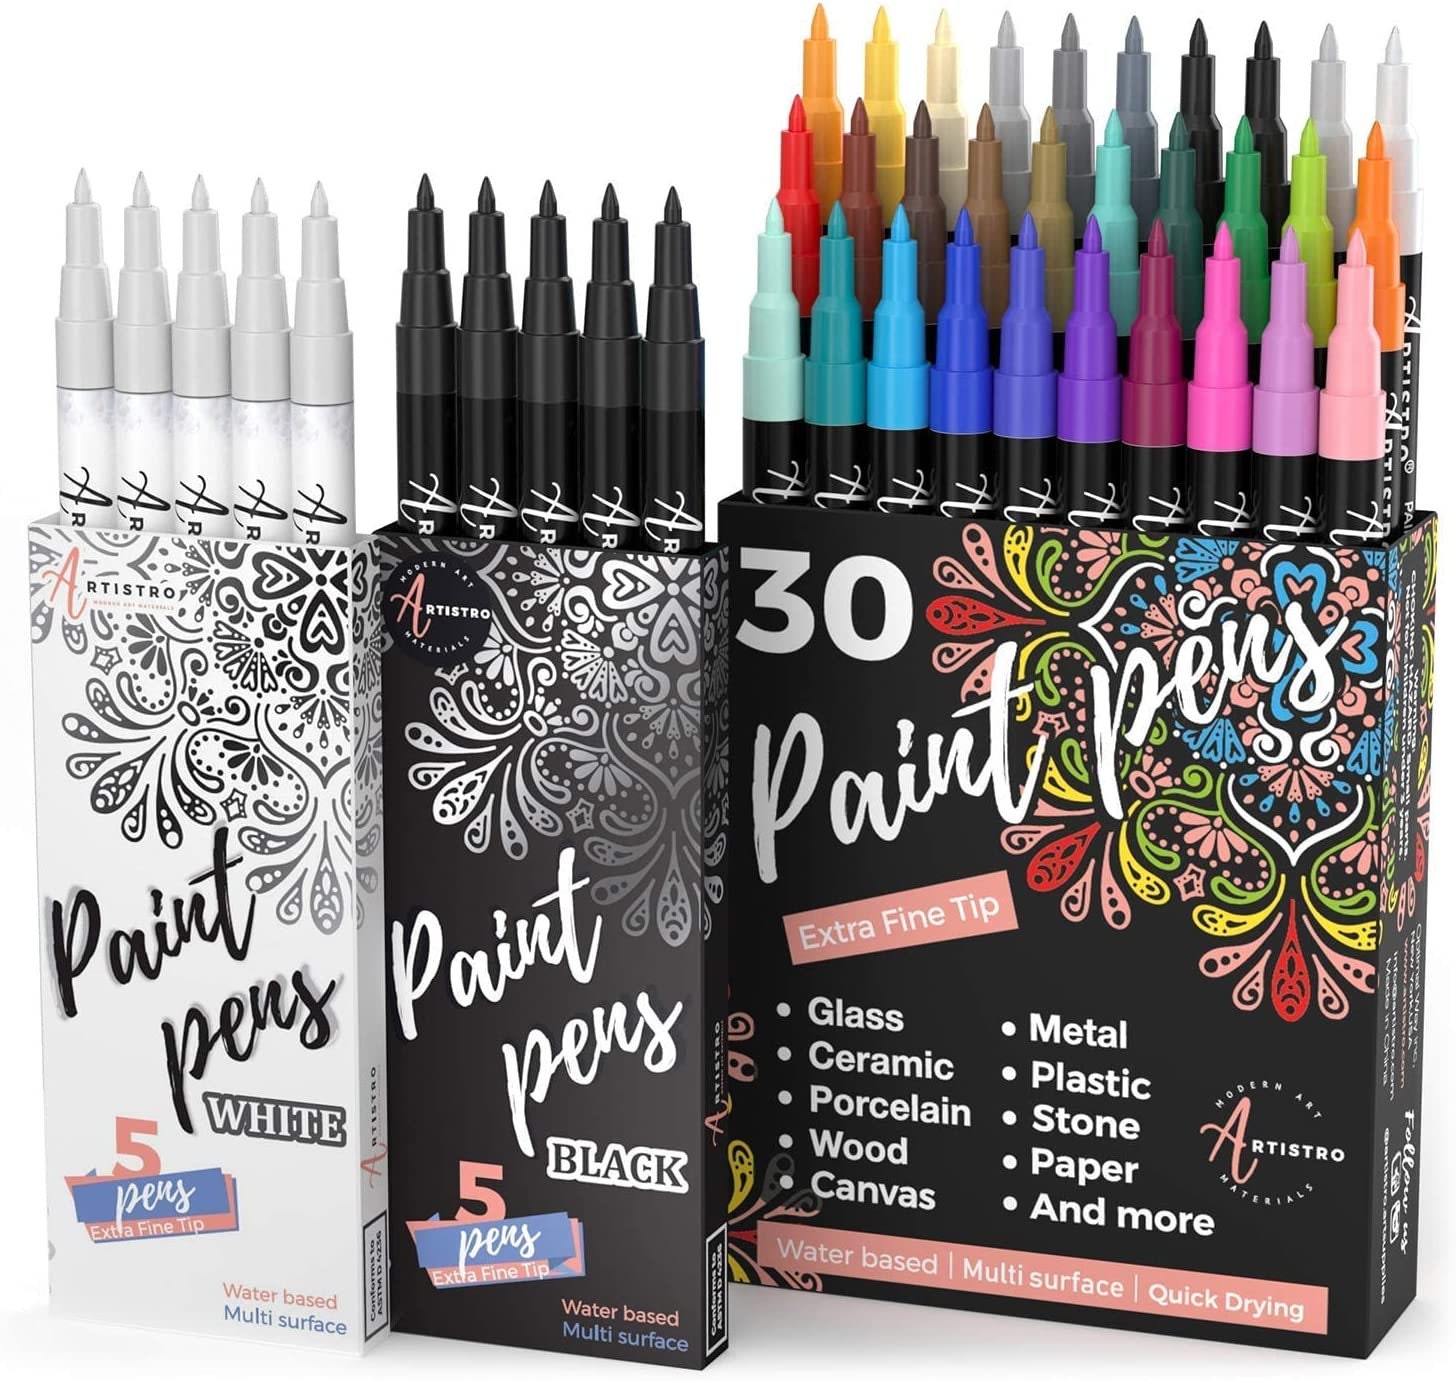 Paint pens for Rock Painting - Wood, Glass, Metal and Ceramic Works on  Almost All Surfaces Set of 15 Vibrant Medium tip Oil Paint Marker Pens,  Quick